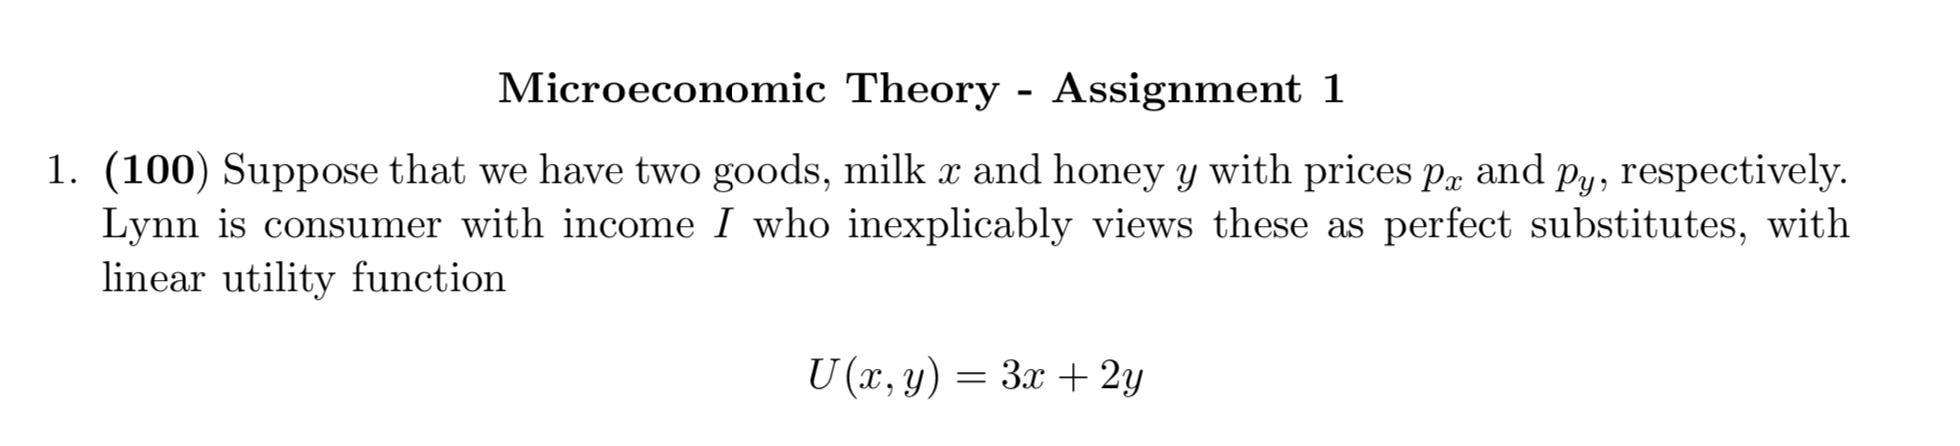 Microeconomic Theory - Assignment 11. (100) Suppose that we have two goods, milk x and honey y with prices Px and Py, respec